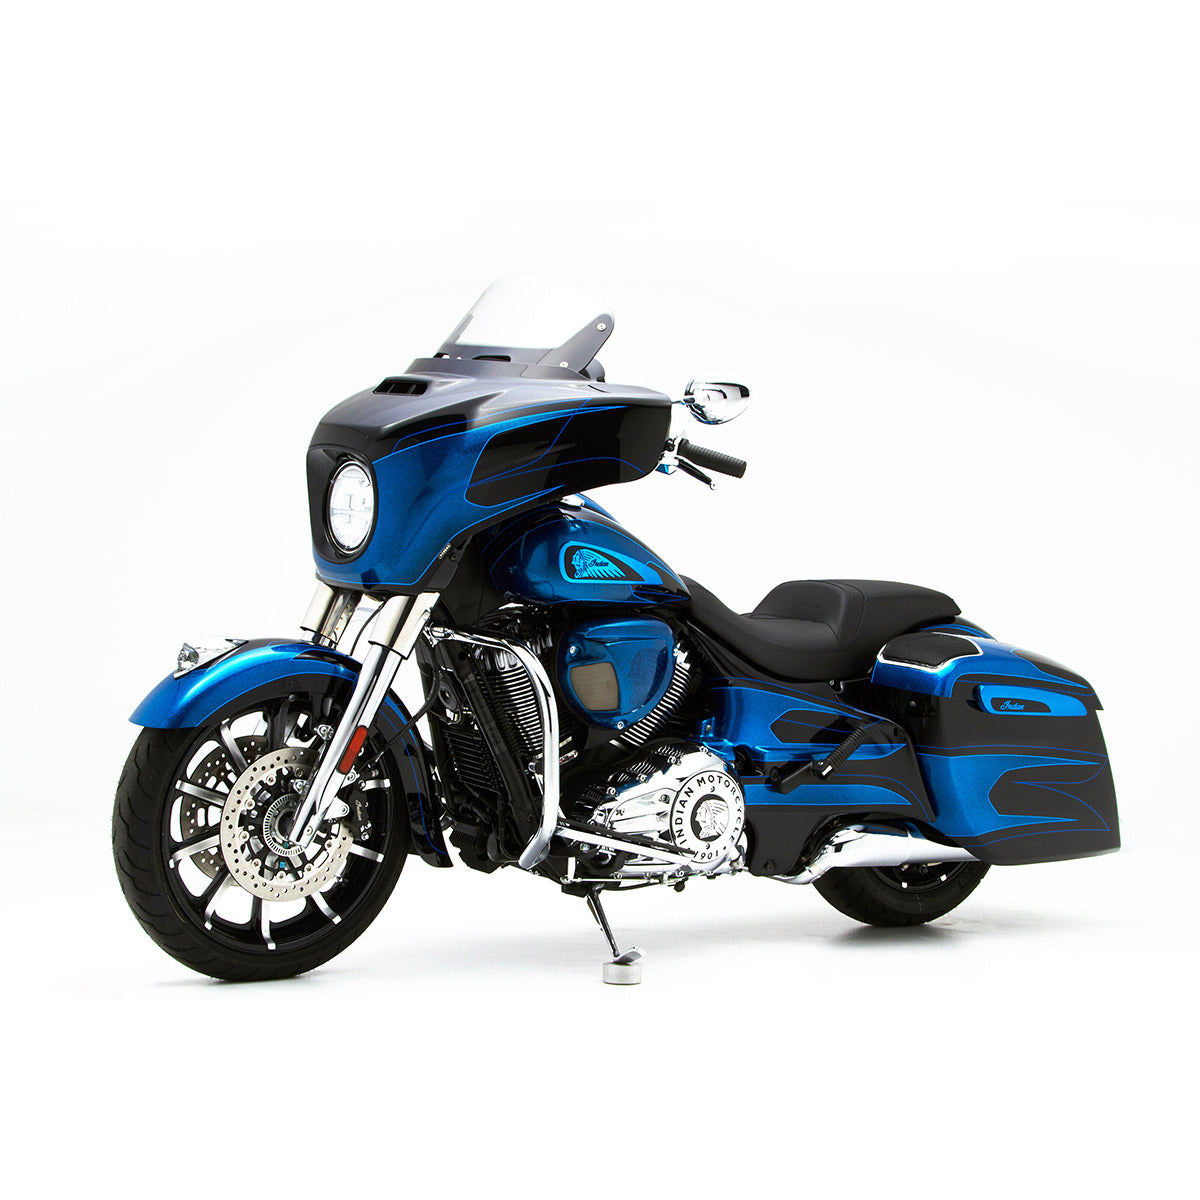 Reytelo Side Covers for Indian® 2019-2024 Chief, Chieftain, Roadmaster, and Springfield motorcycles with new style bags  shown on 2019 Chieftain(Shown on 2019 Chieftain)